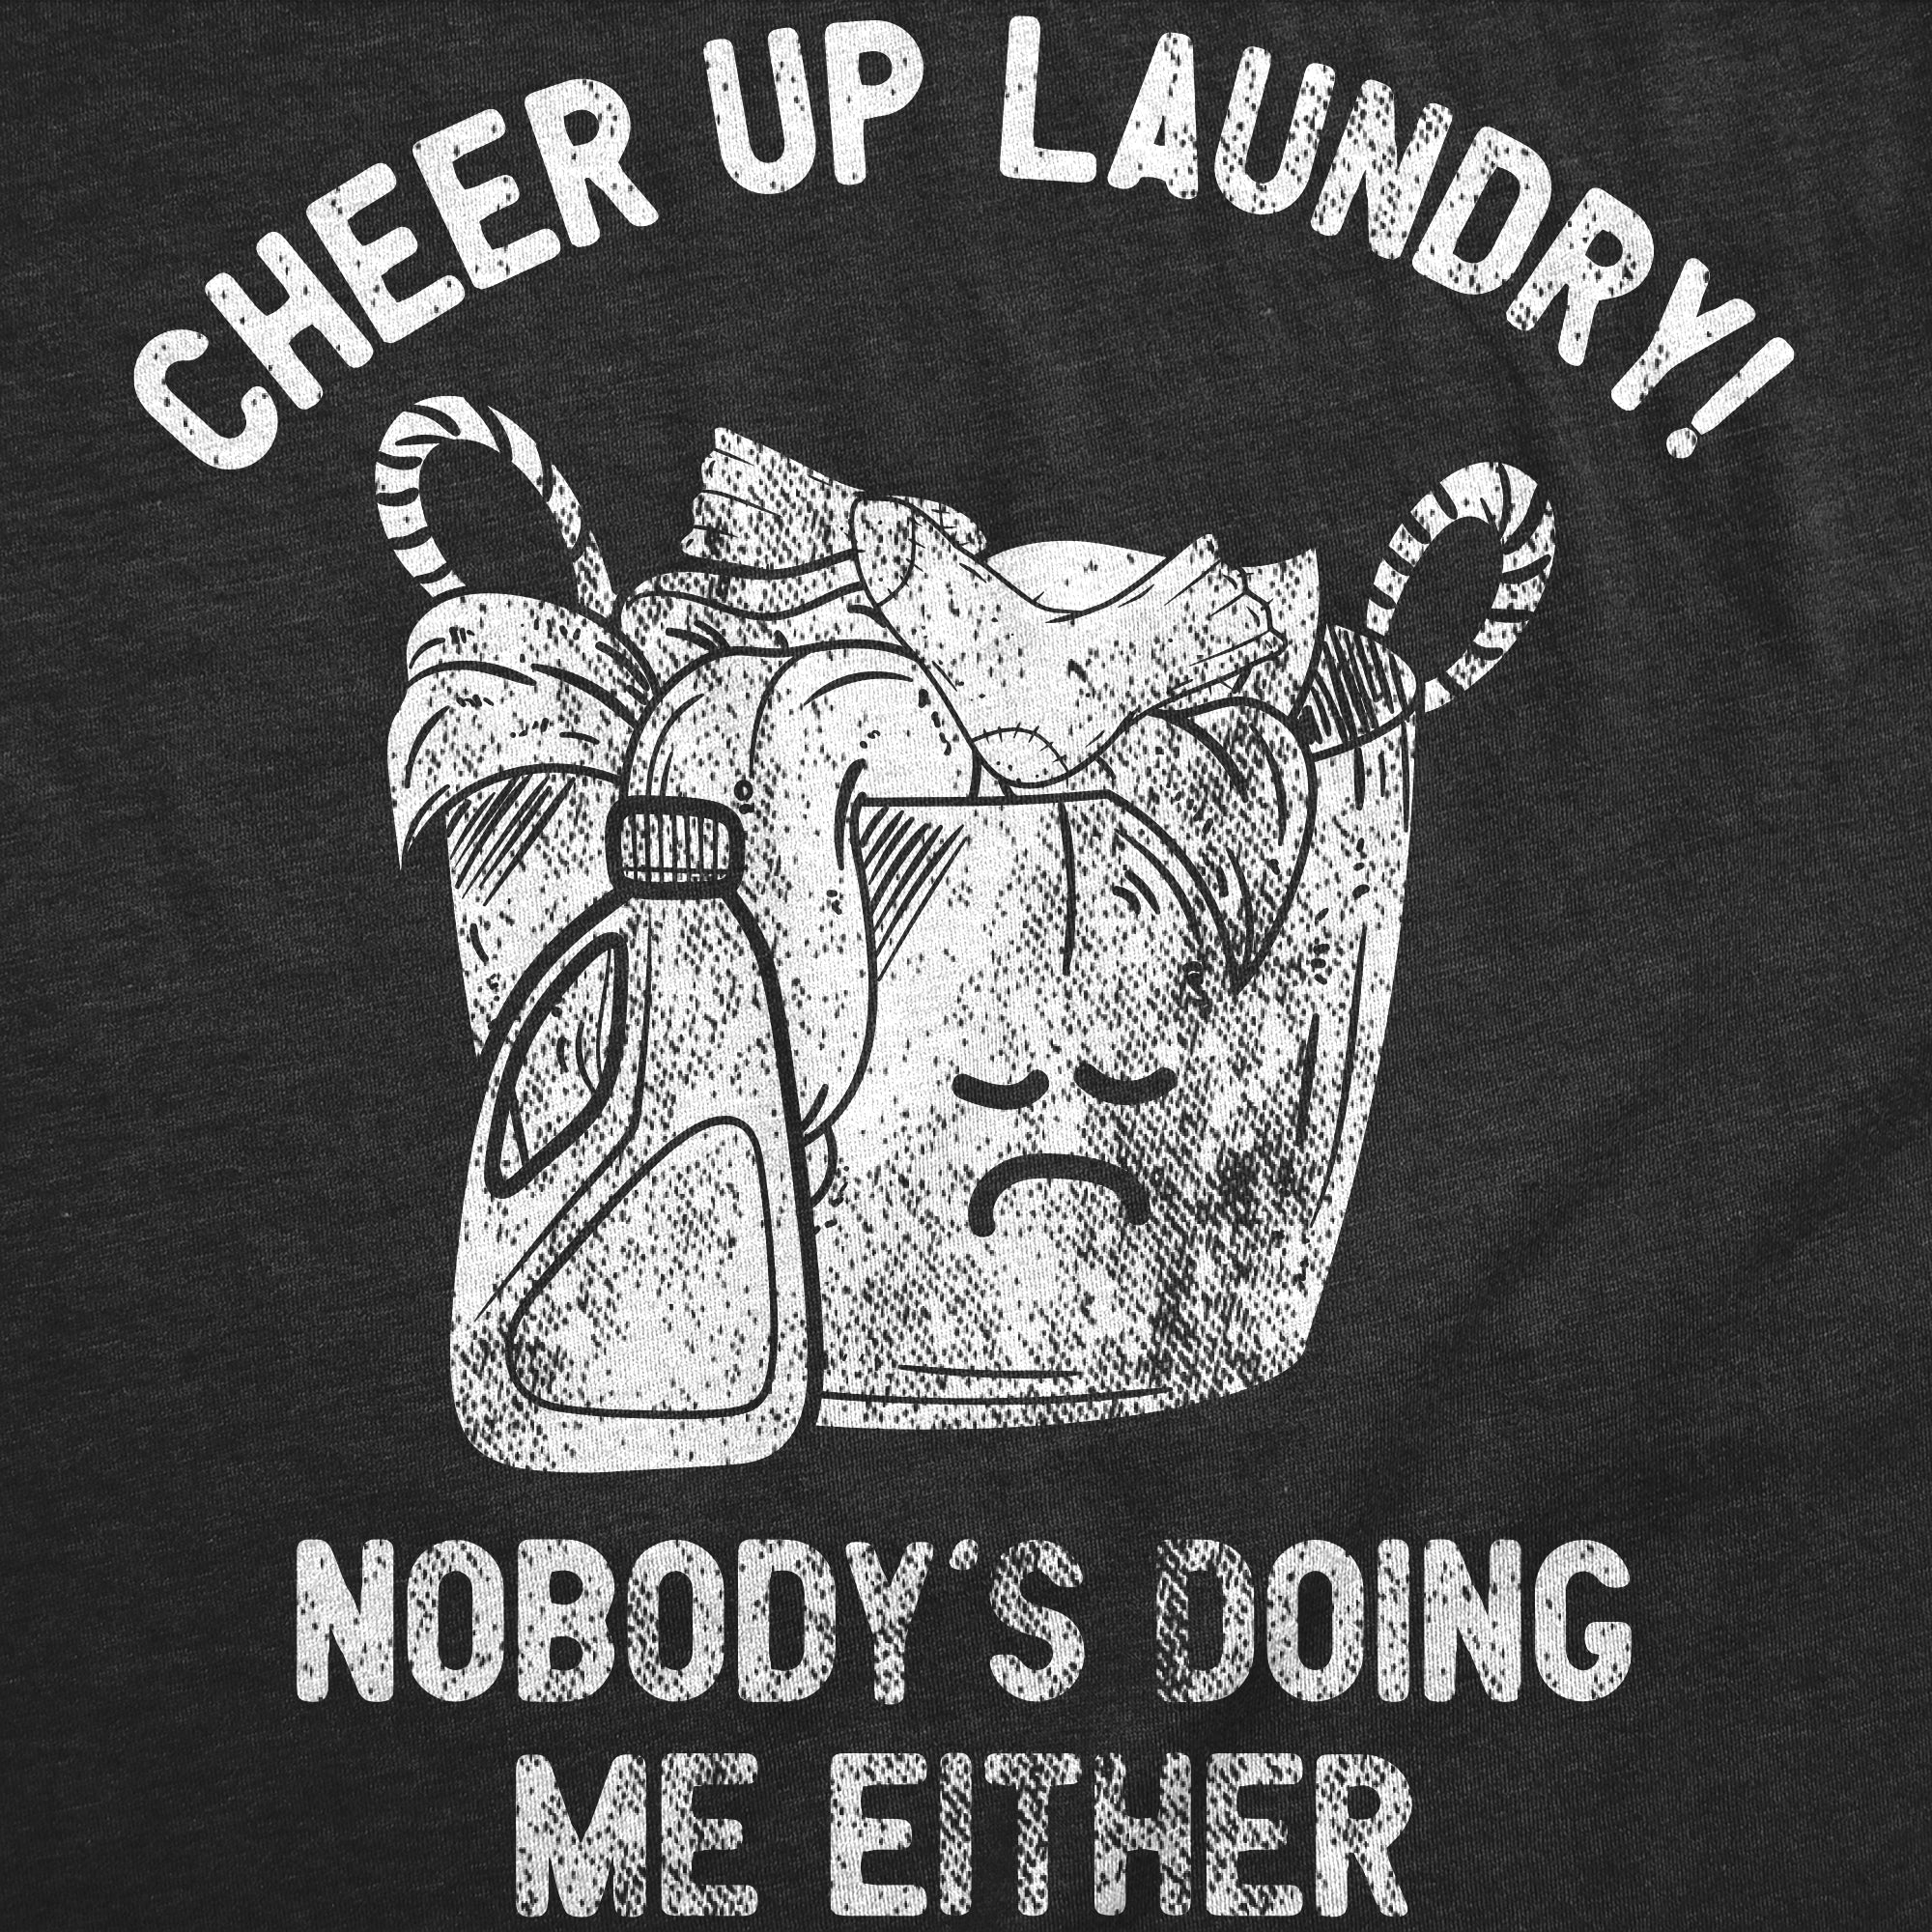 Funny Heather Black - Cheer Up Laundry Cheer Up Laundry Nobodys Doing Me Either Womens T Shirt Nerdy sarcastic Tee